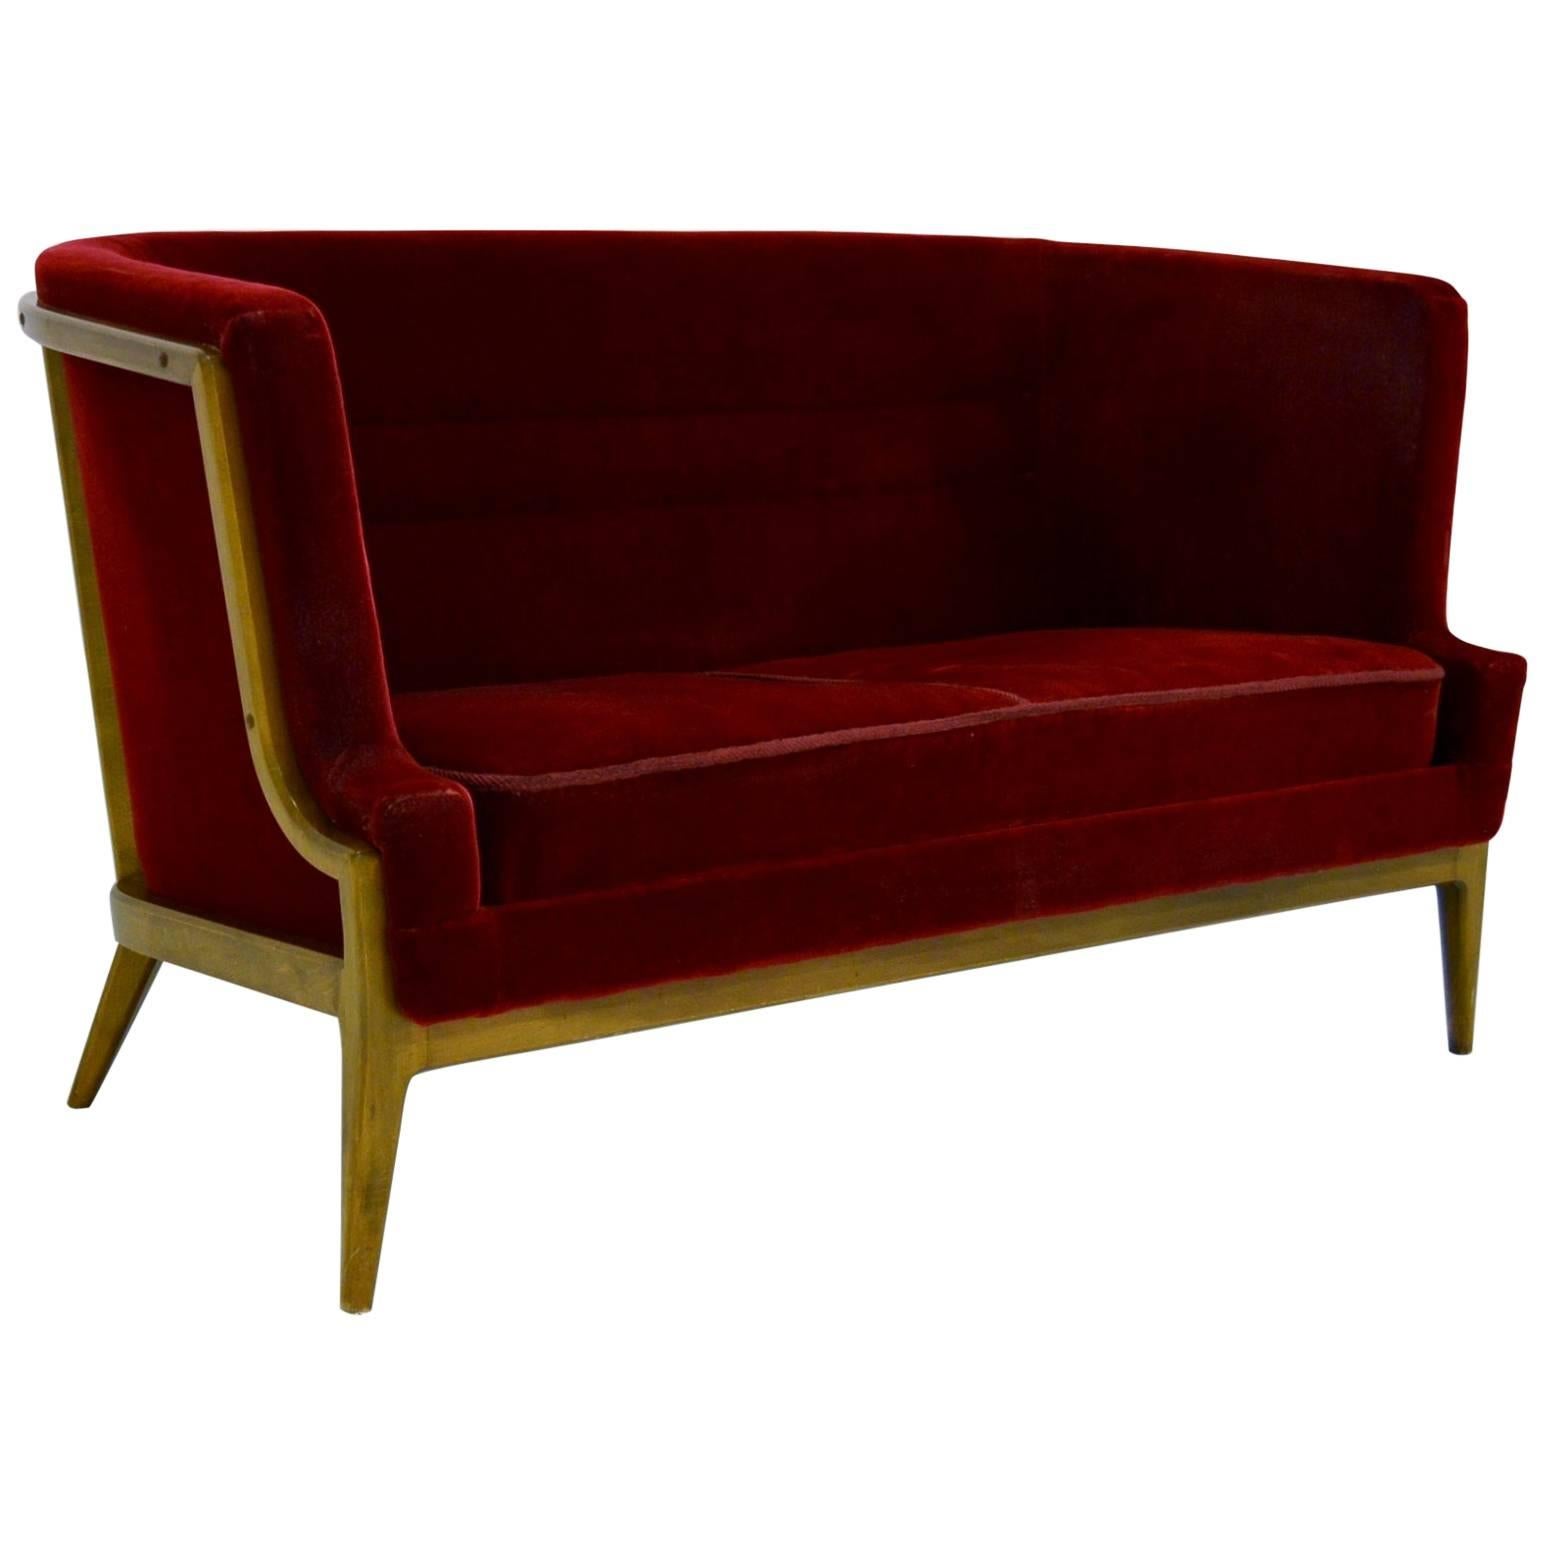 Carl-Axel Acking Sofa for Bodafors, 1940s For Sale